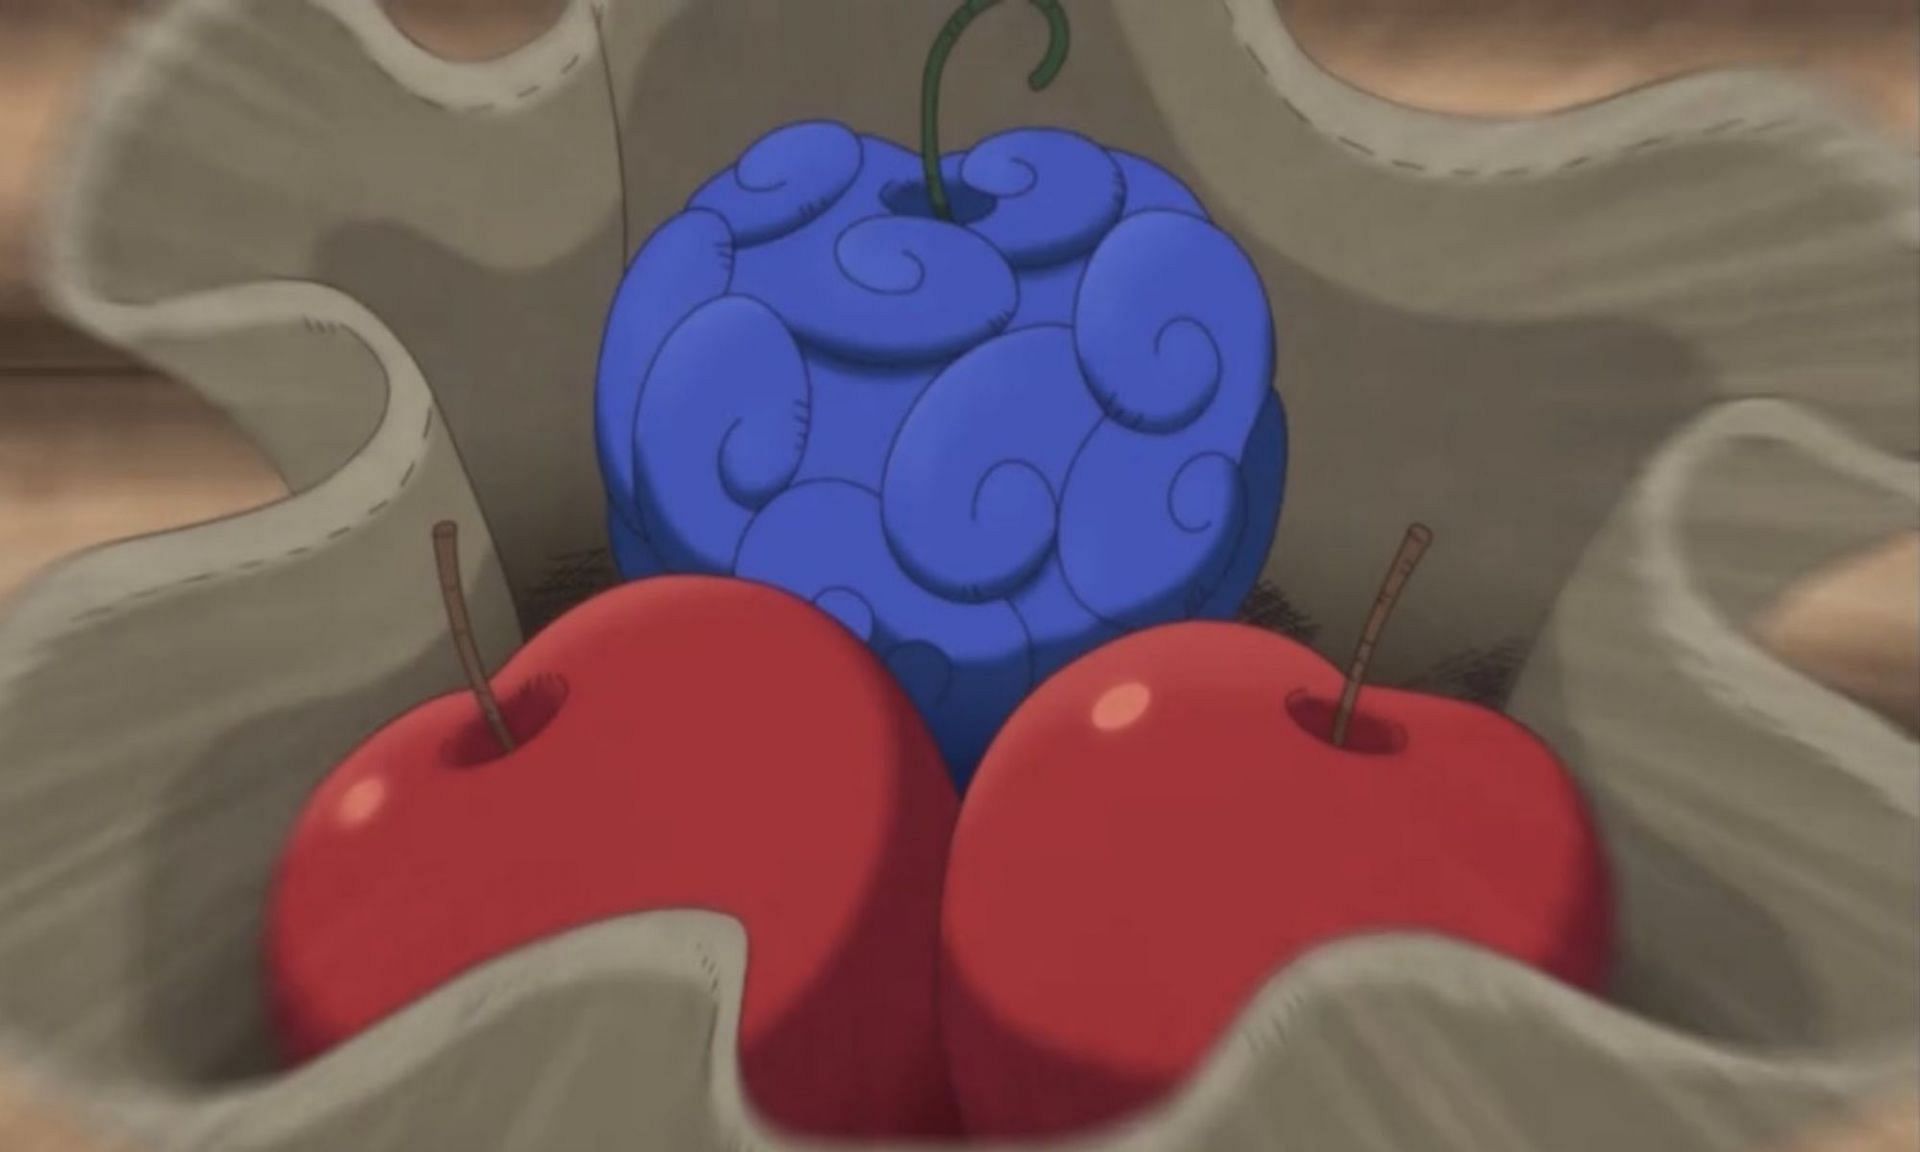 One Piece Finally Explains Luffy's New Devil Fruit Abilities